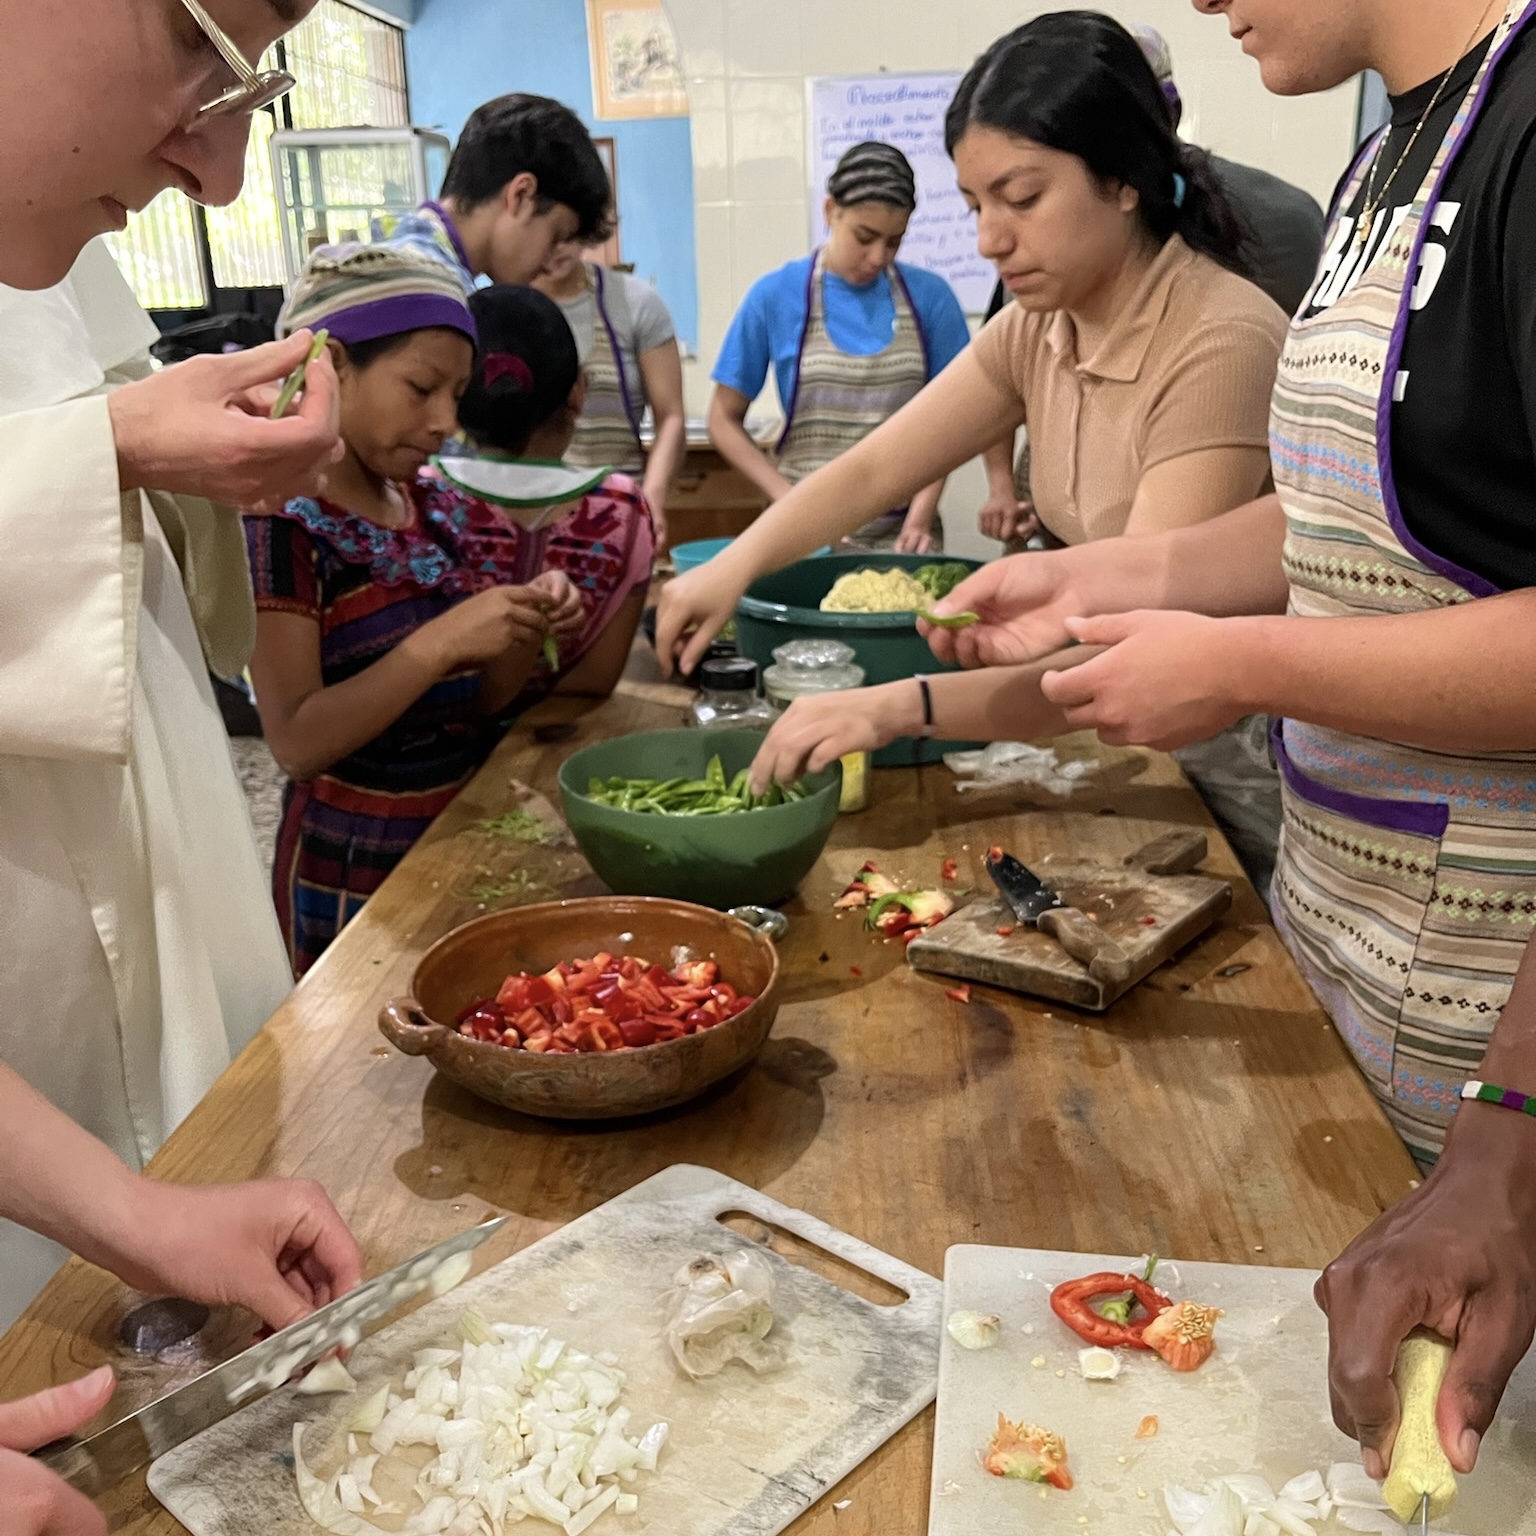 Students and locals chopping vegetables in the kitchen